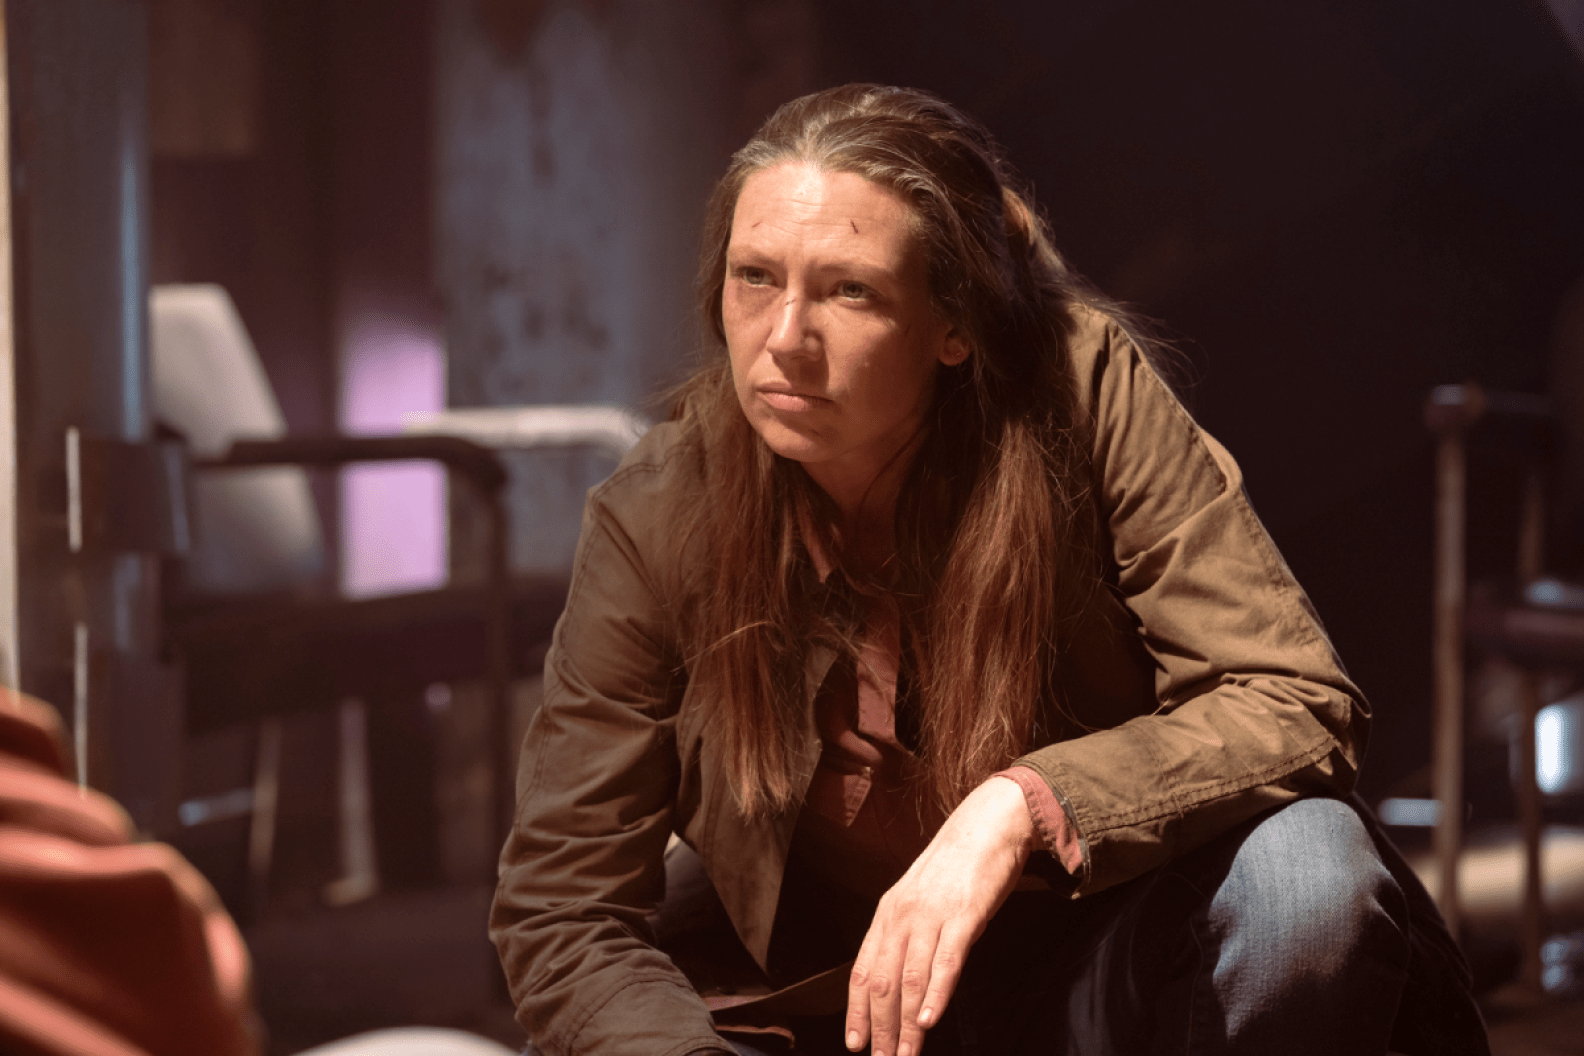 Anna Torv as Tess in 'The Last of Us'